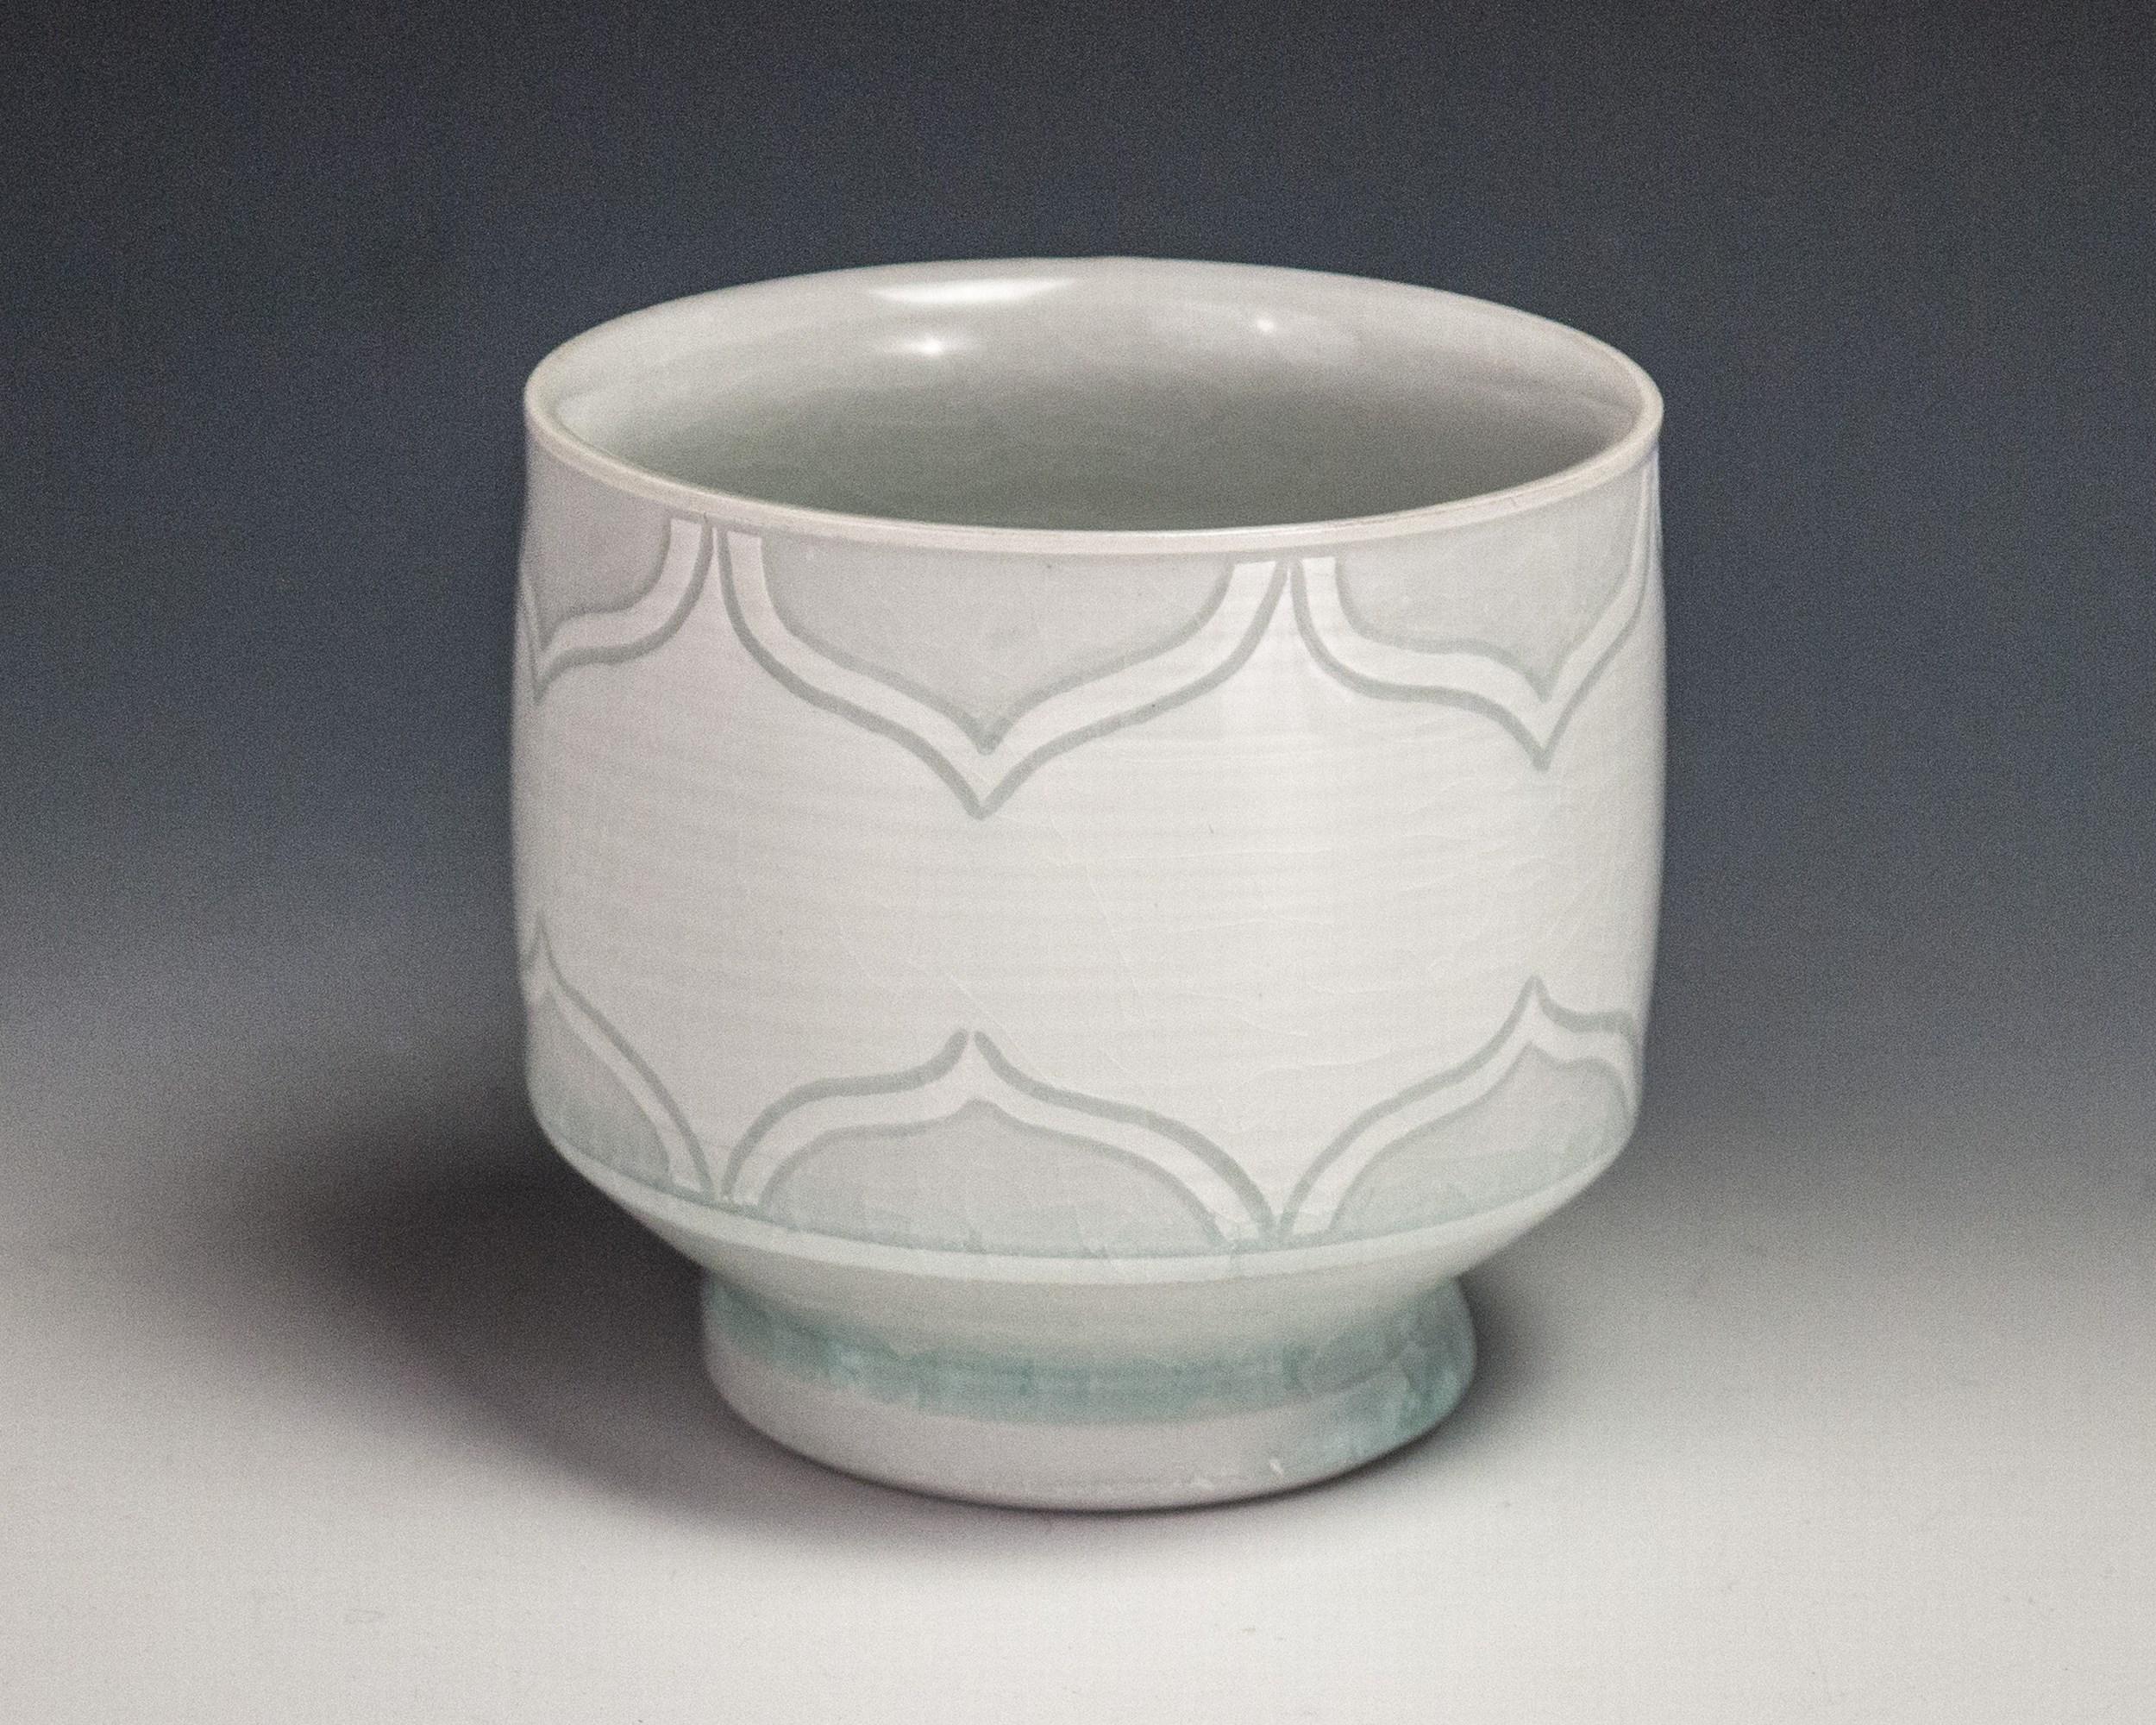 Sgraffito White Cup - Contemporary Art by Steven Young Lee